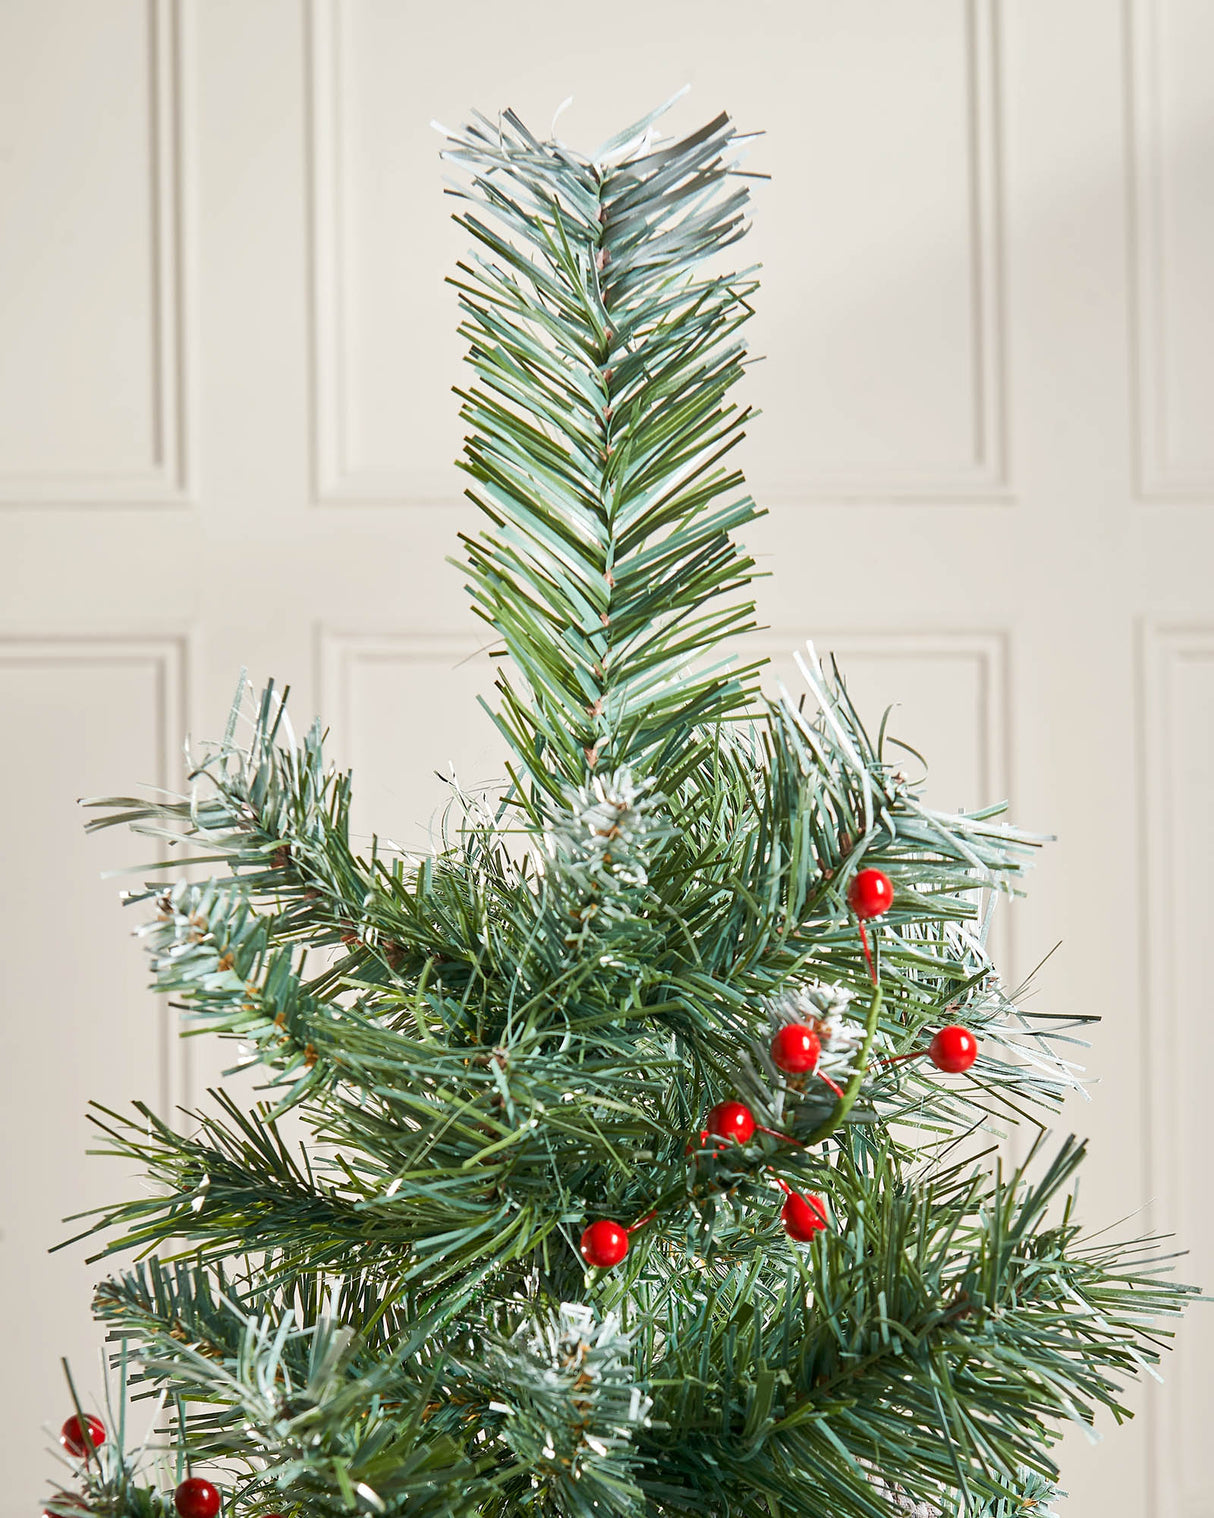 Potted Scandinavian Blue Spruce Christmas Tree, 3 ft